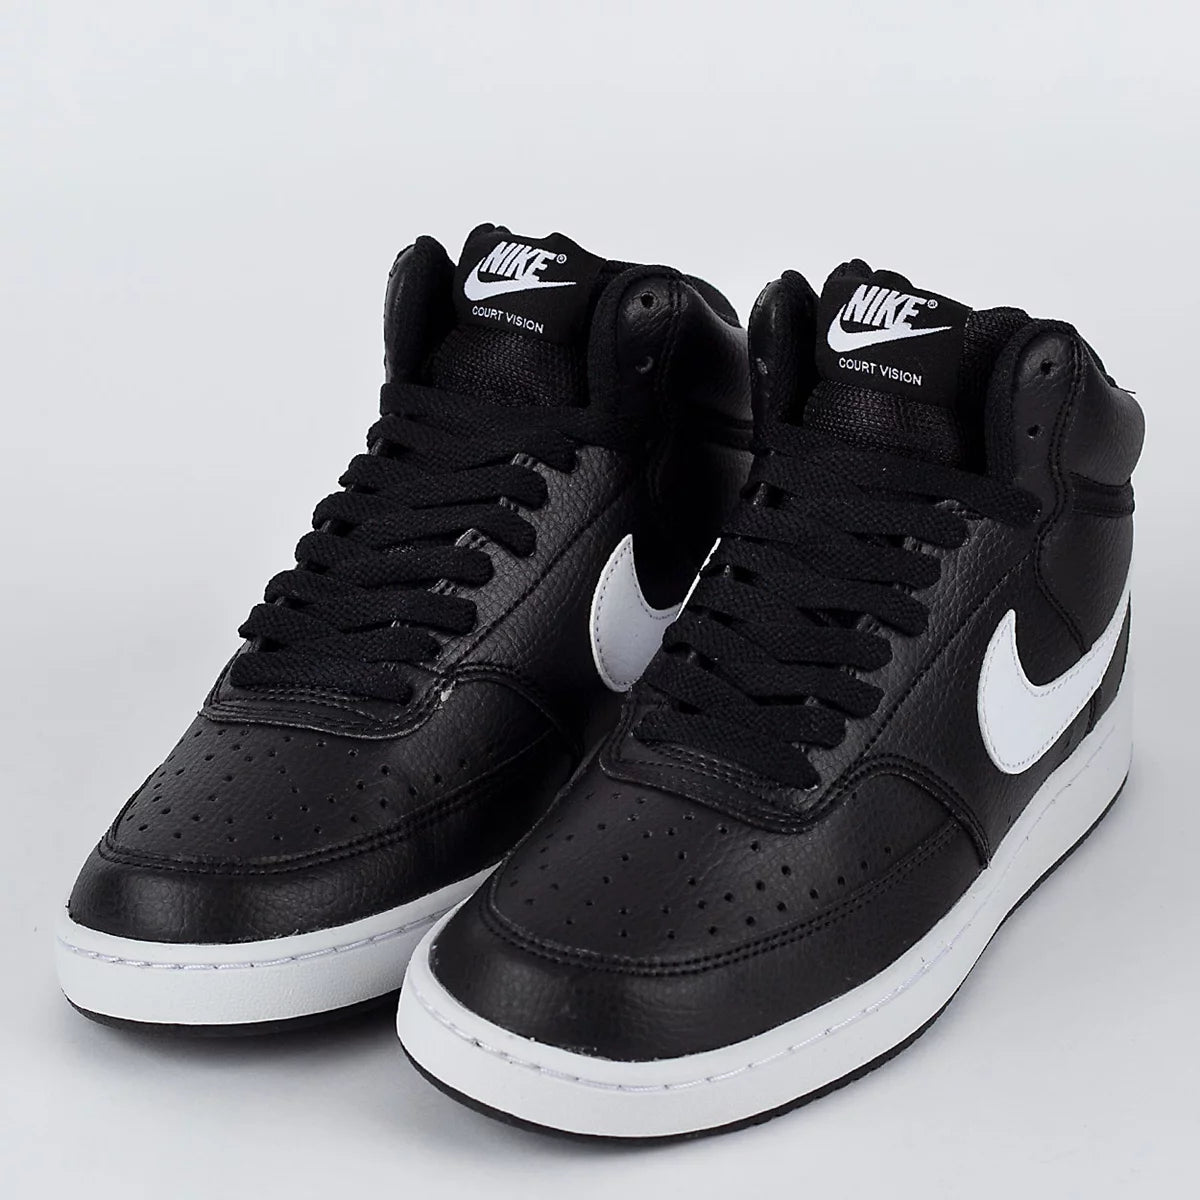 NIKE Court Vision Mid- Hombre